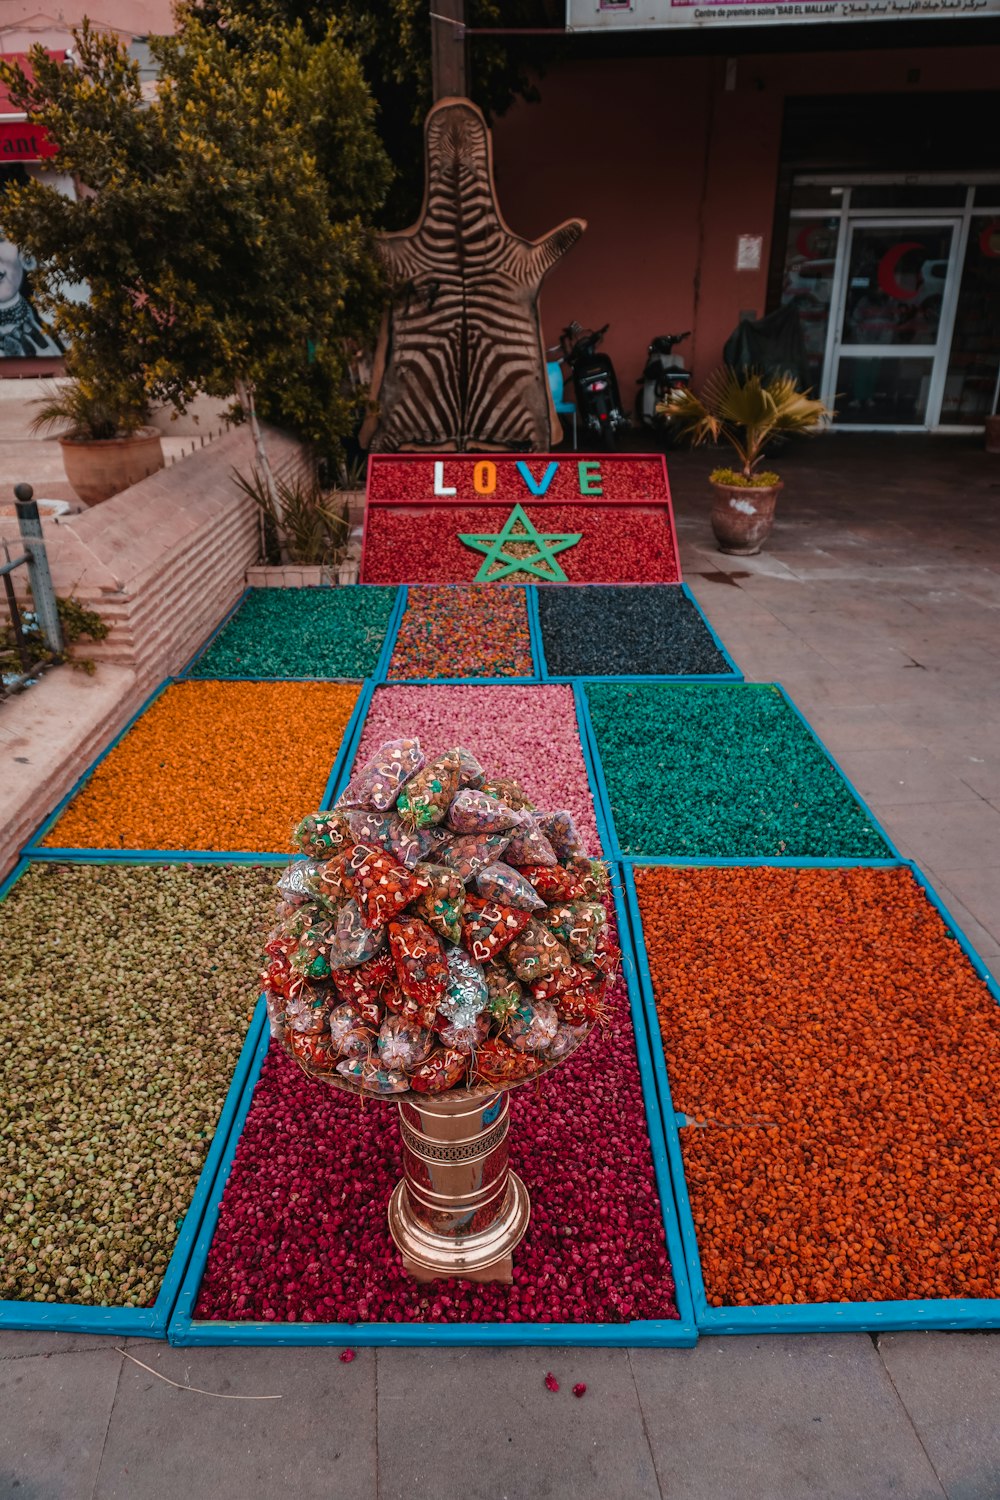 a colorful display of candy and candies on a sidewalk